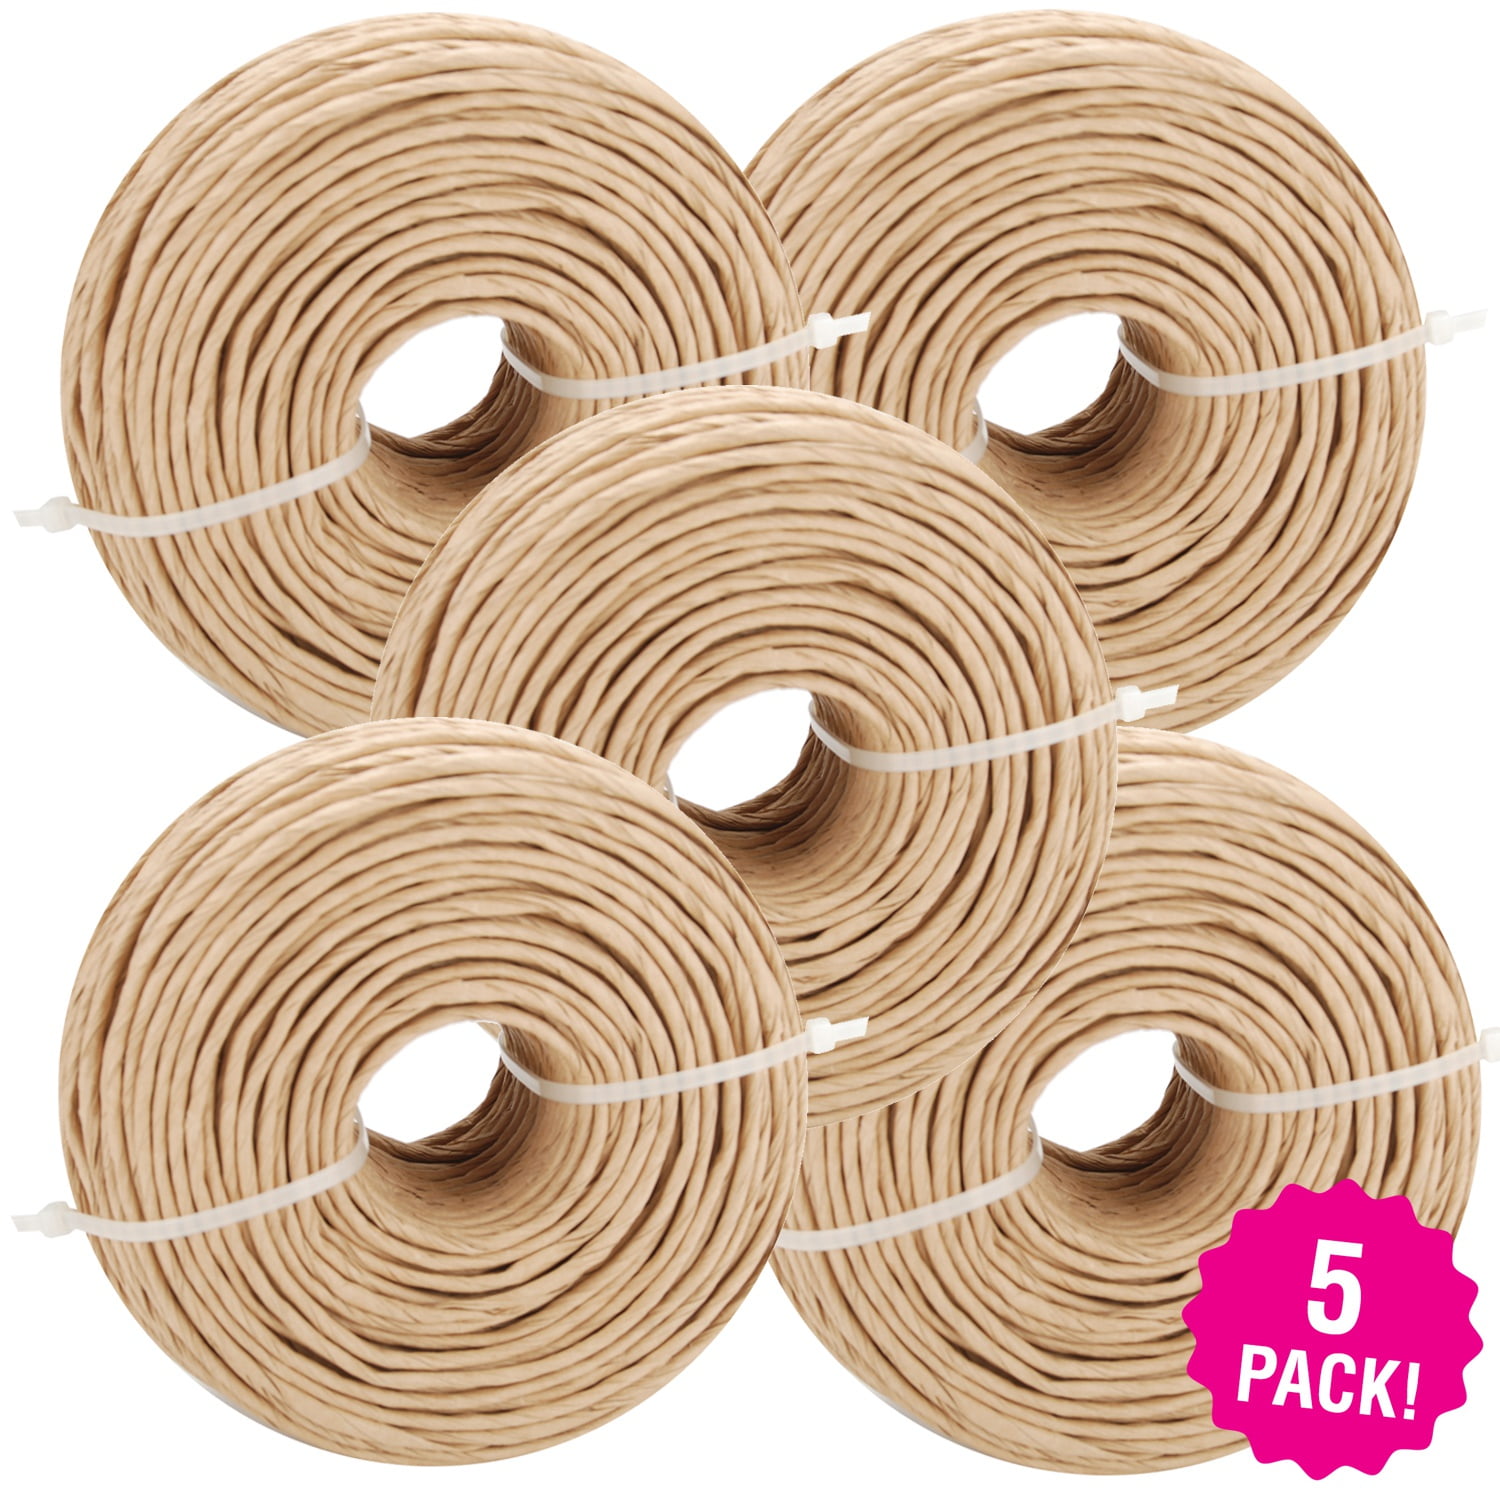 Commonwealth Basket FR632K2 Fibre Rush 6/32-Inch 2-Pound Coil - Pack of 2 Kraft Approximately 210-Feet